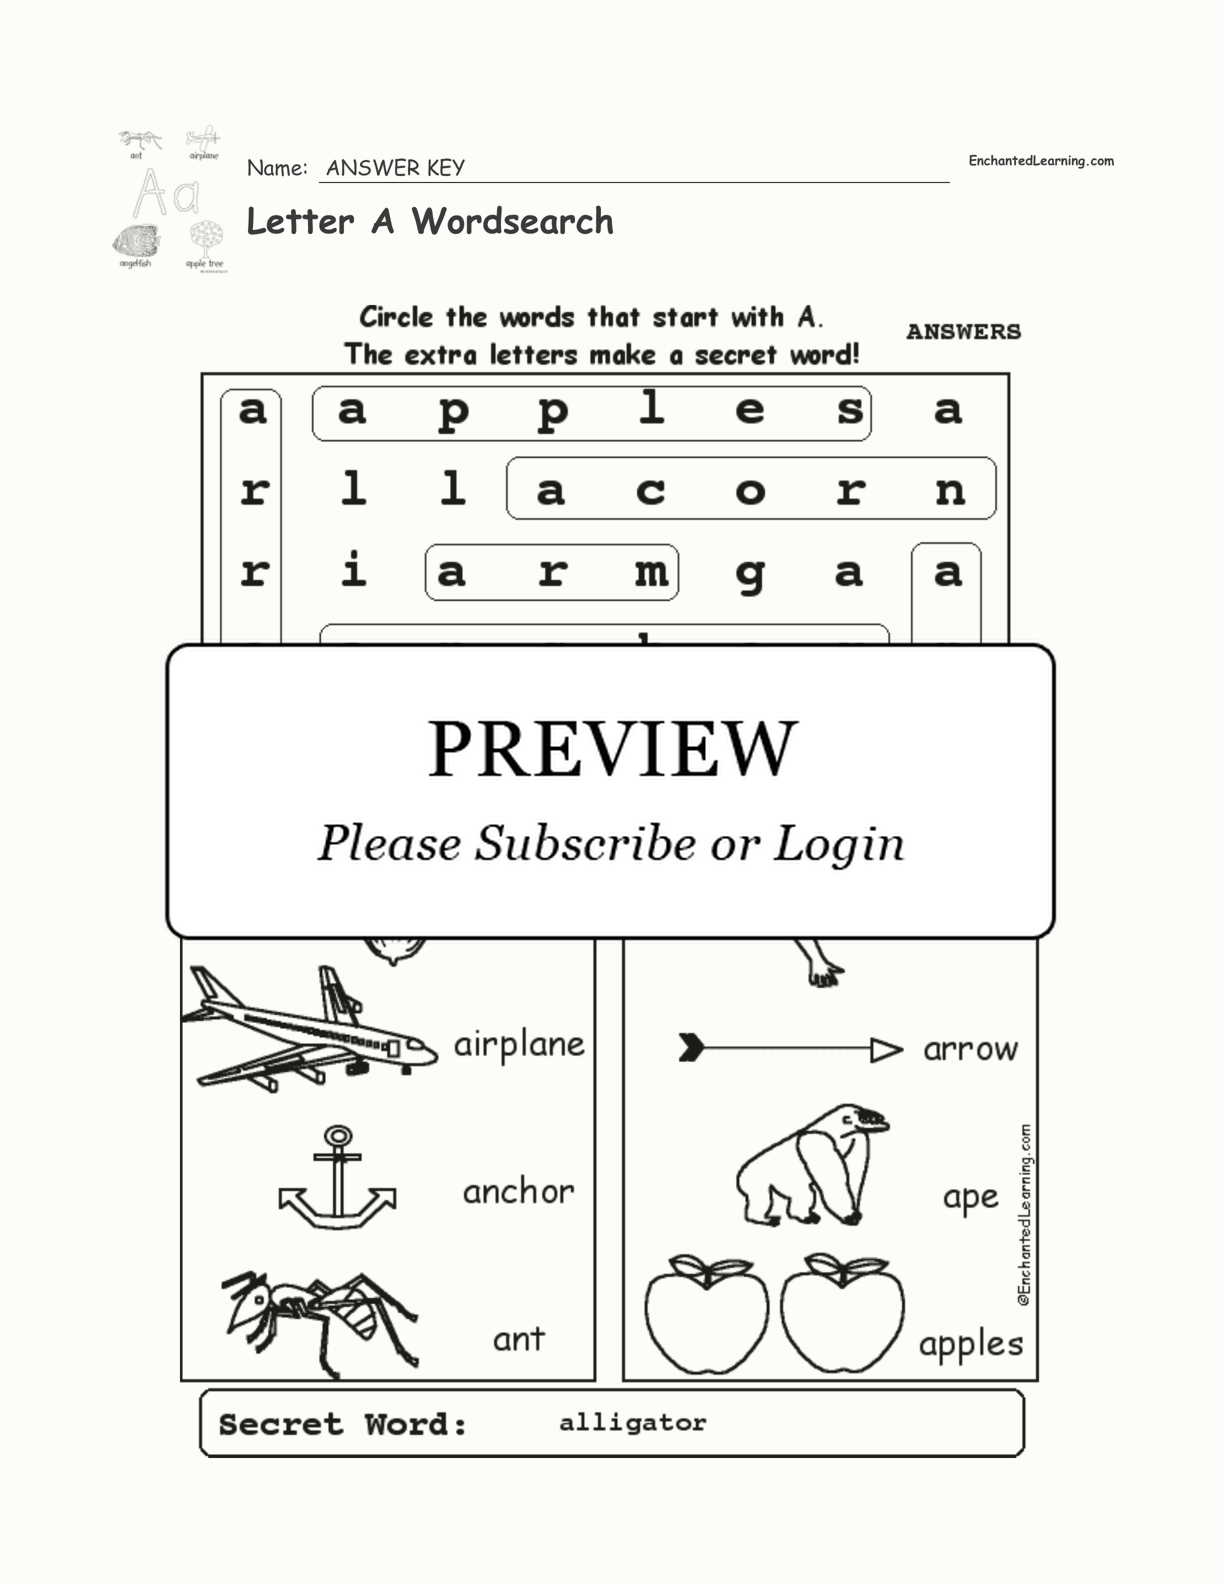 Letter A Wordsearch interactive worksheet page 2